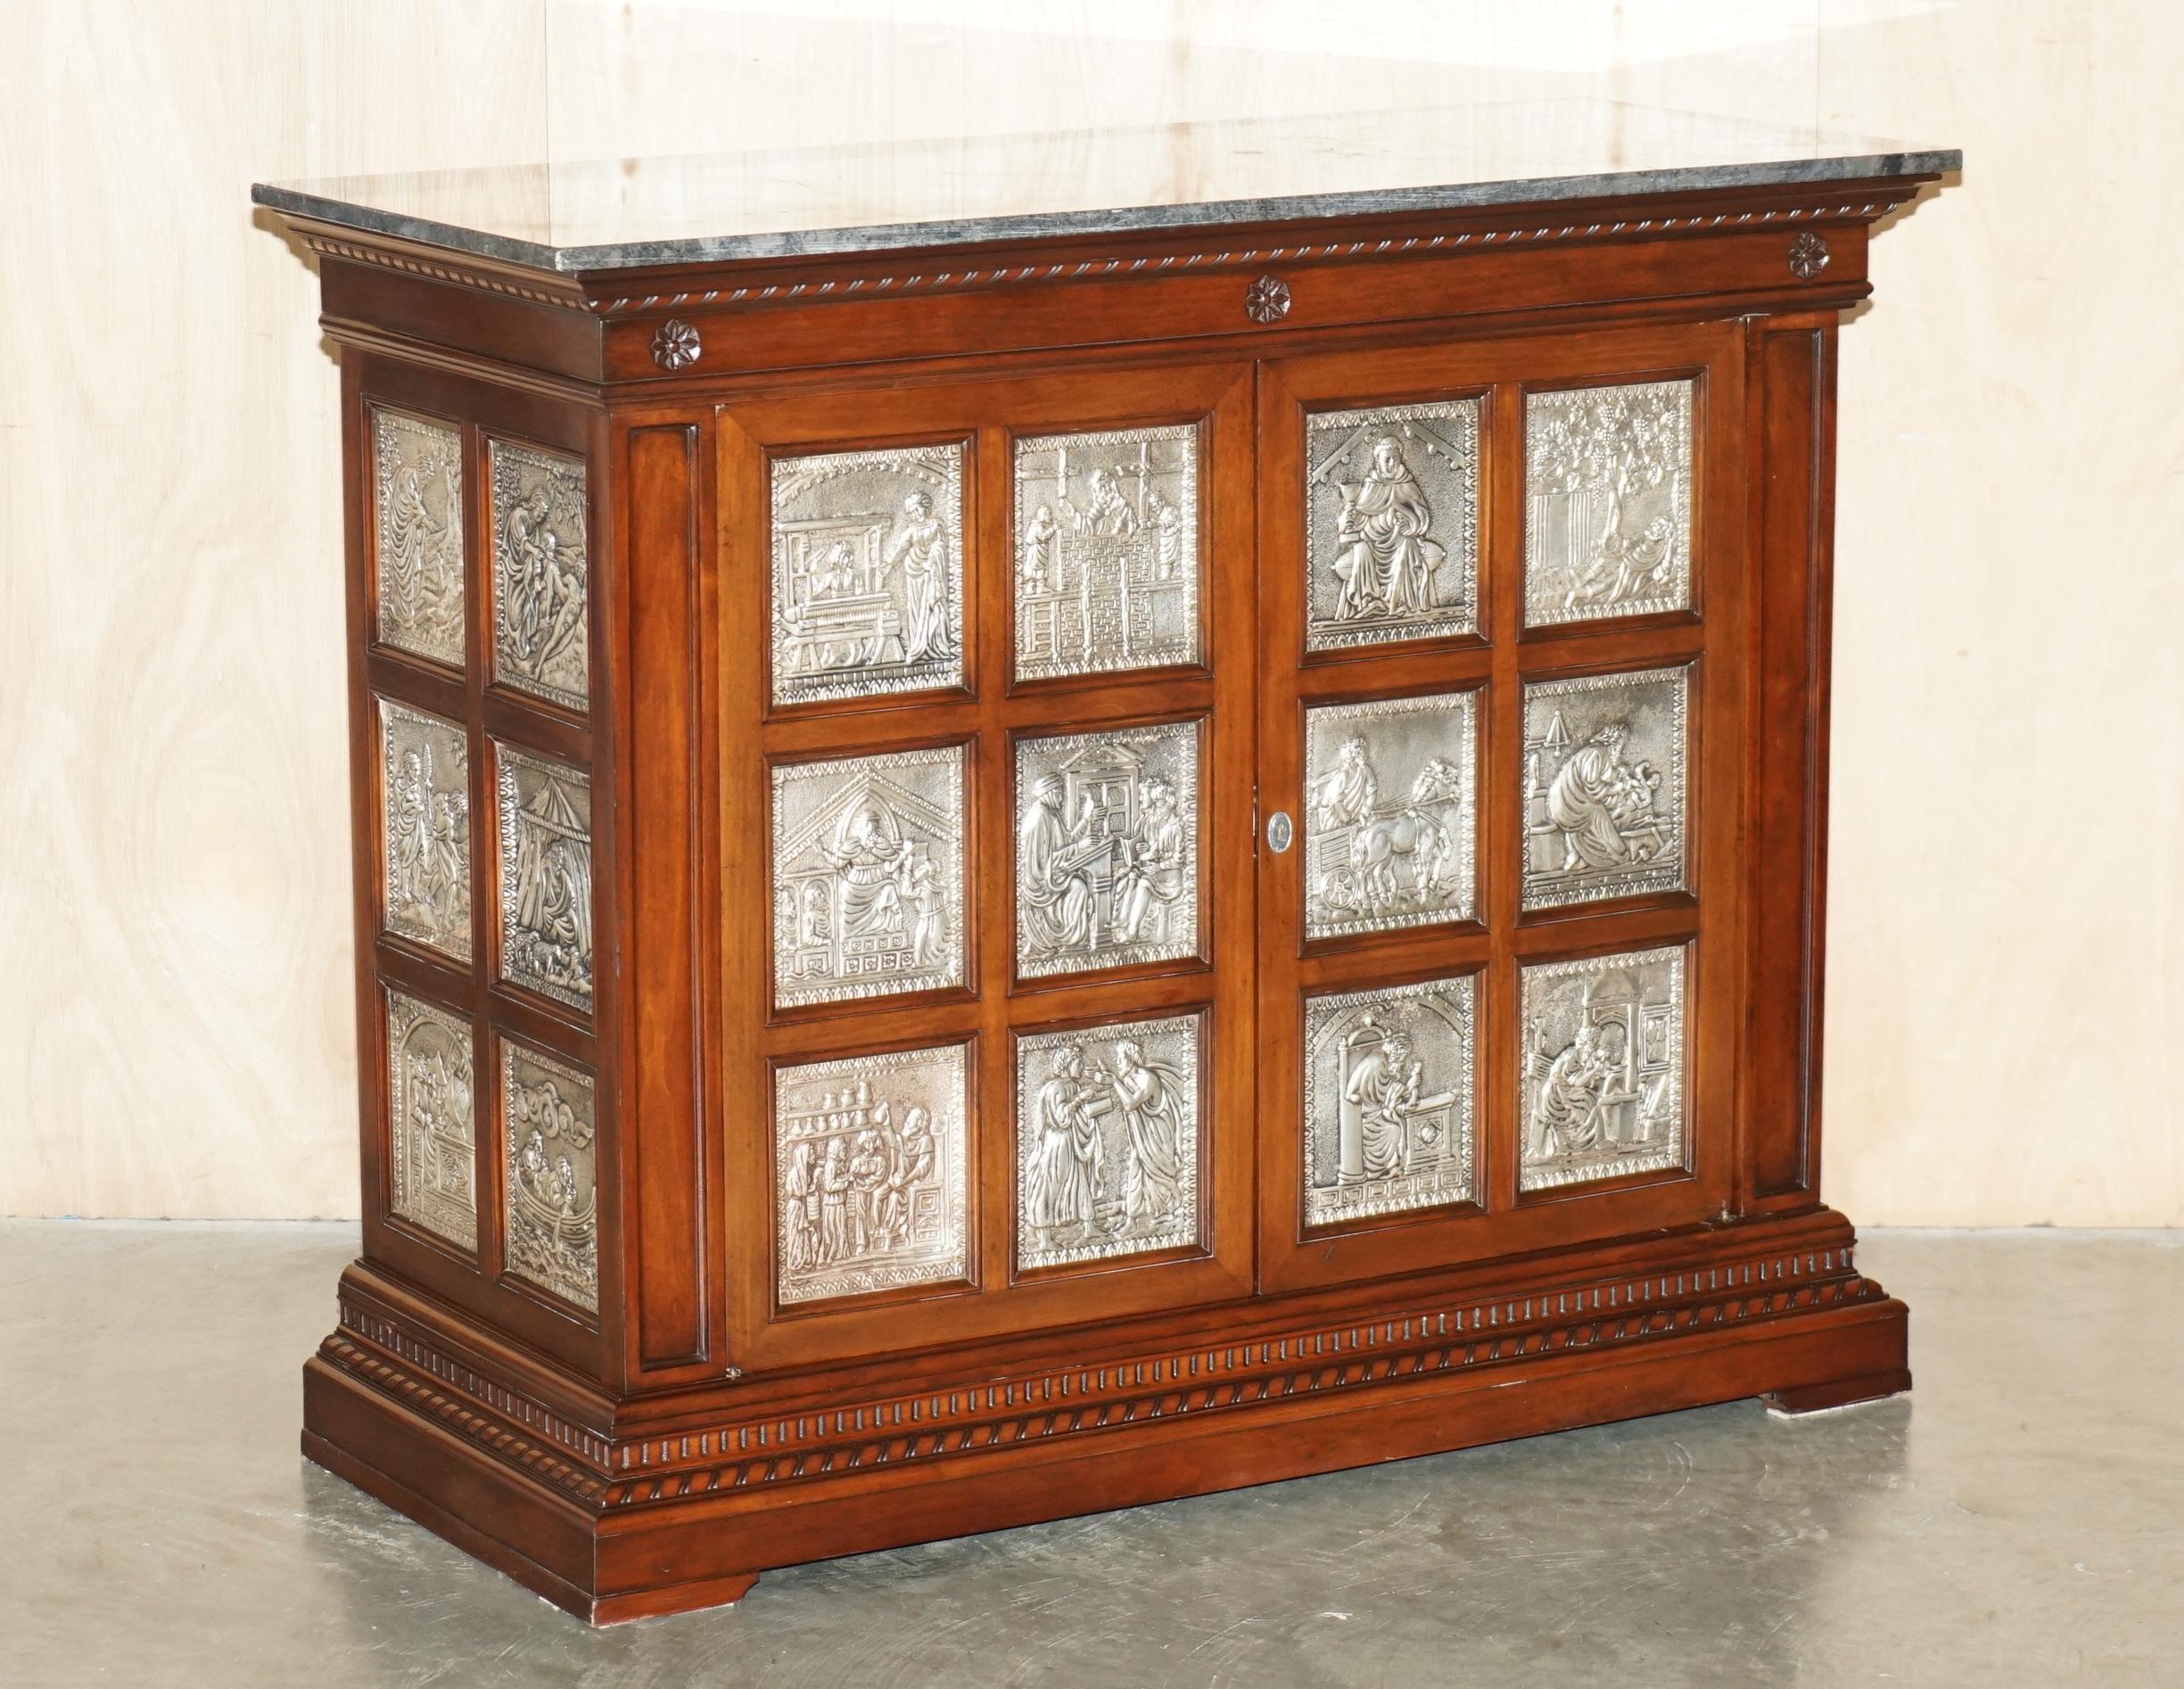 Royal House Antiques

Royal House Antiques is delighted to offer for sale this very decorative sideboard with 24 sterling silver panels depicting the Human Activities 

Please note the delivery fee listed is just a guide, it covers within the M25